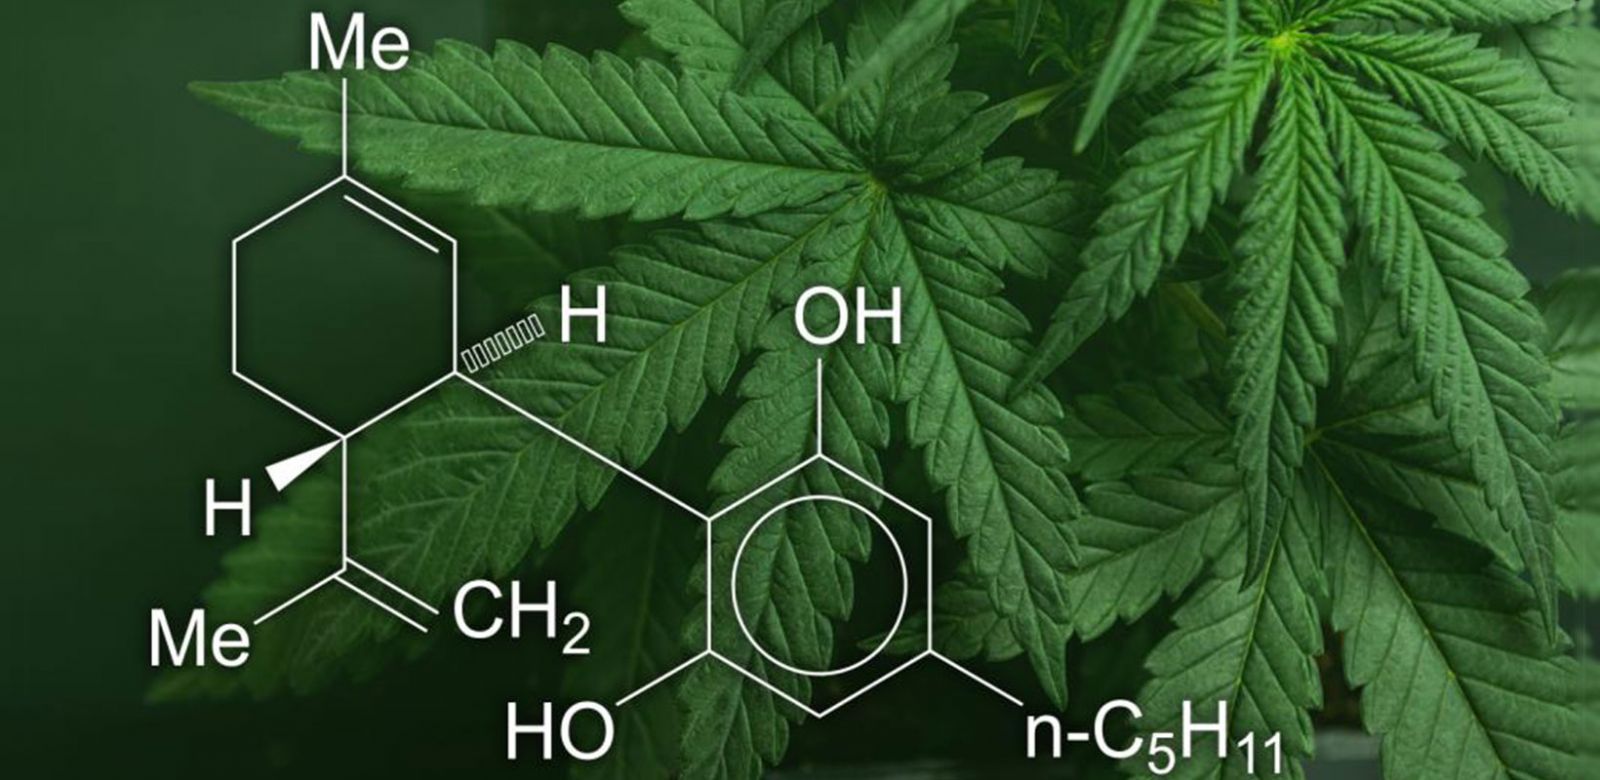 Photo for: The Chemistry Behind Cannabis Beverages